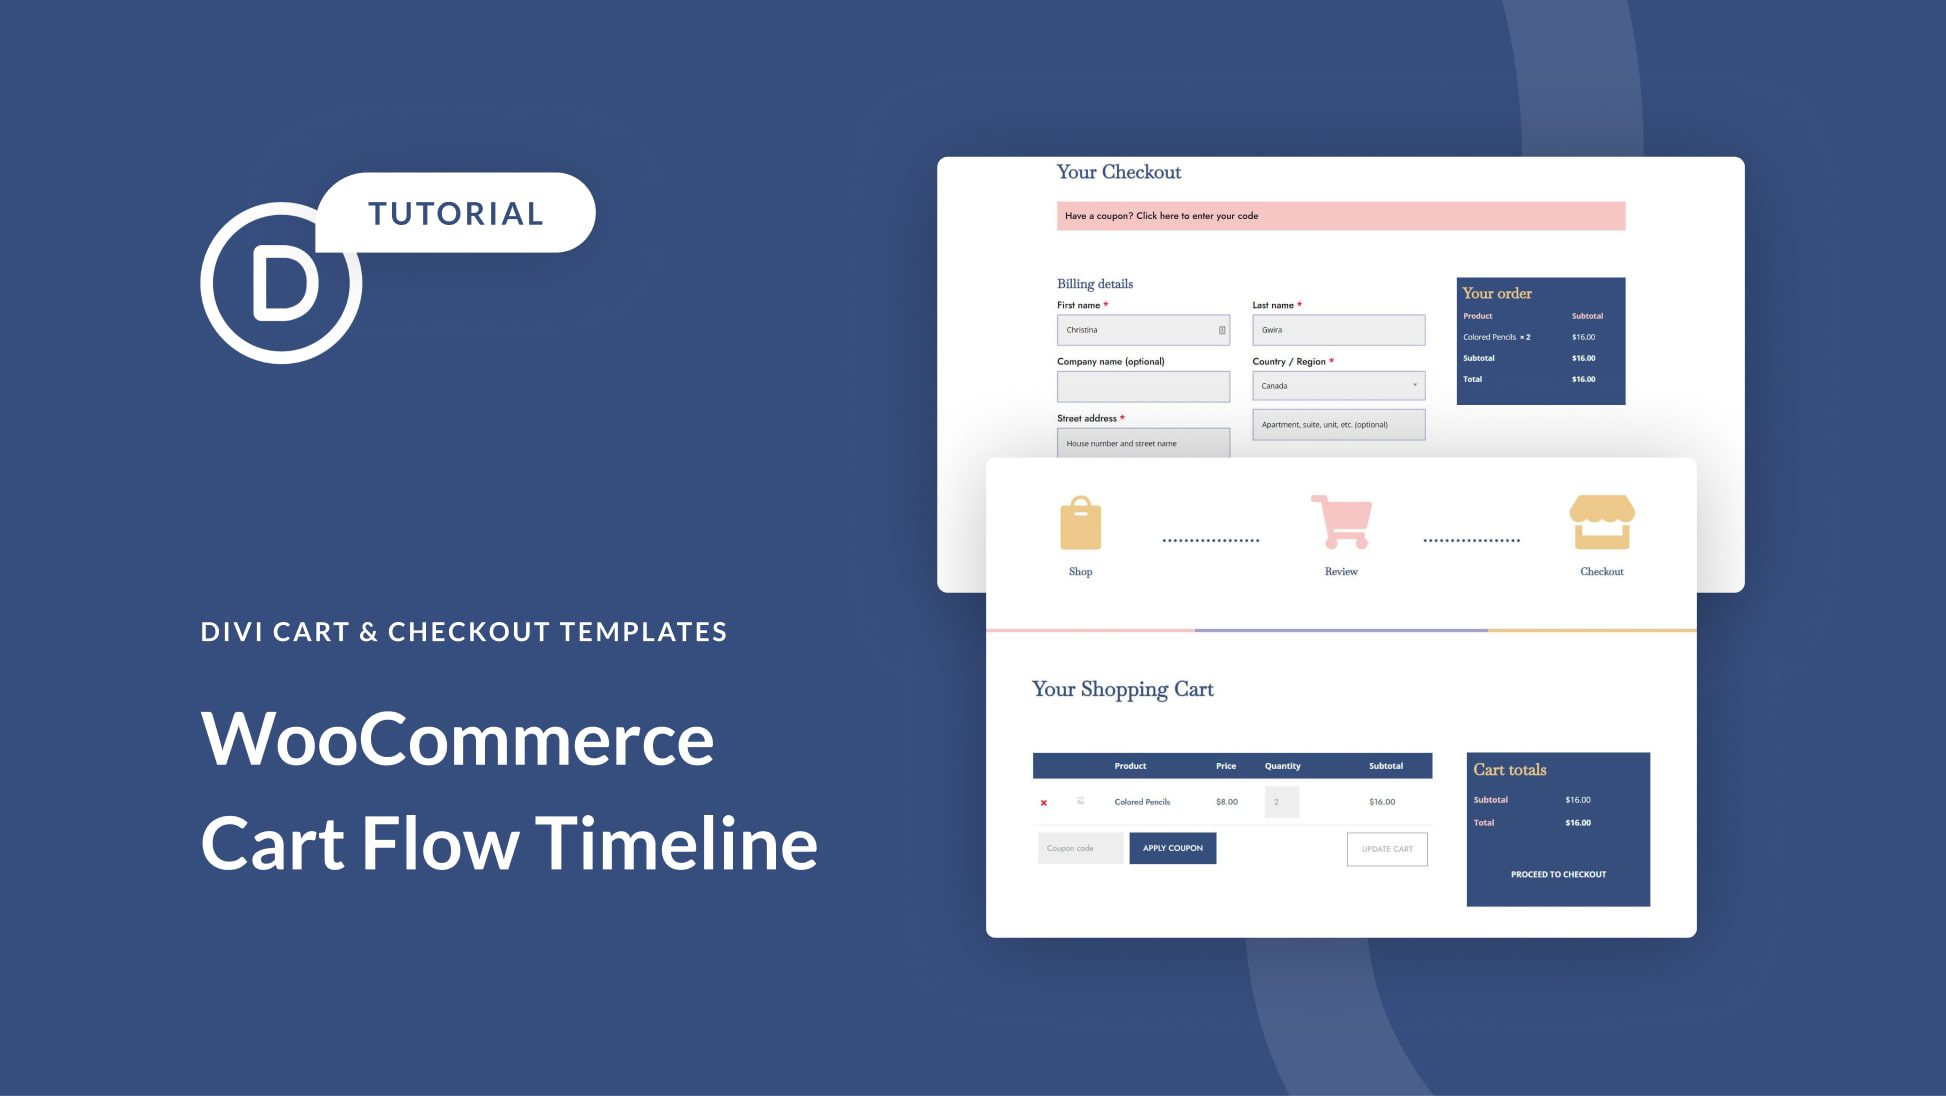 How to Make a WooCommerce Cart Flow Timeline with Divi